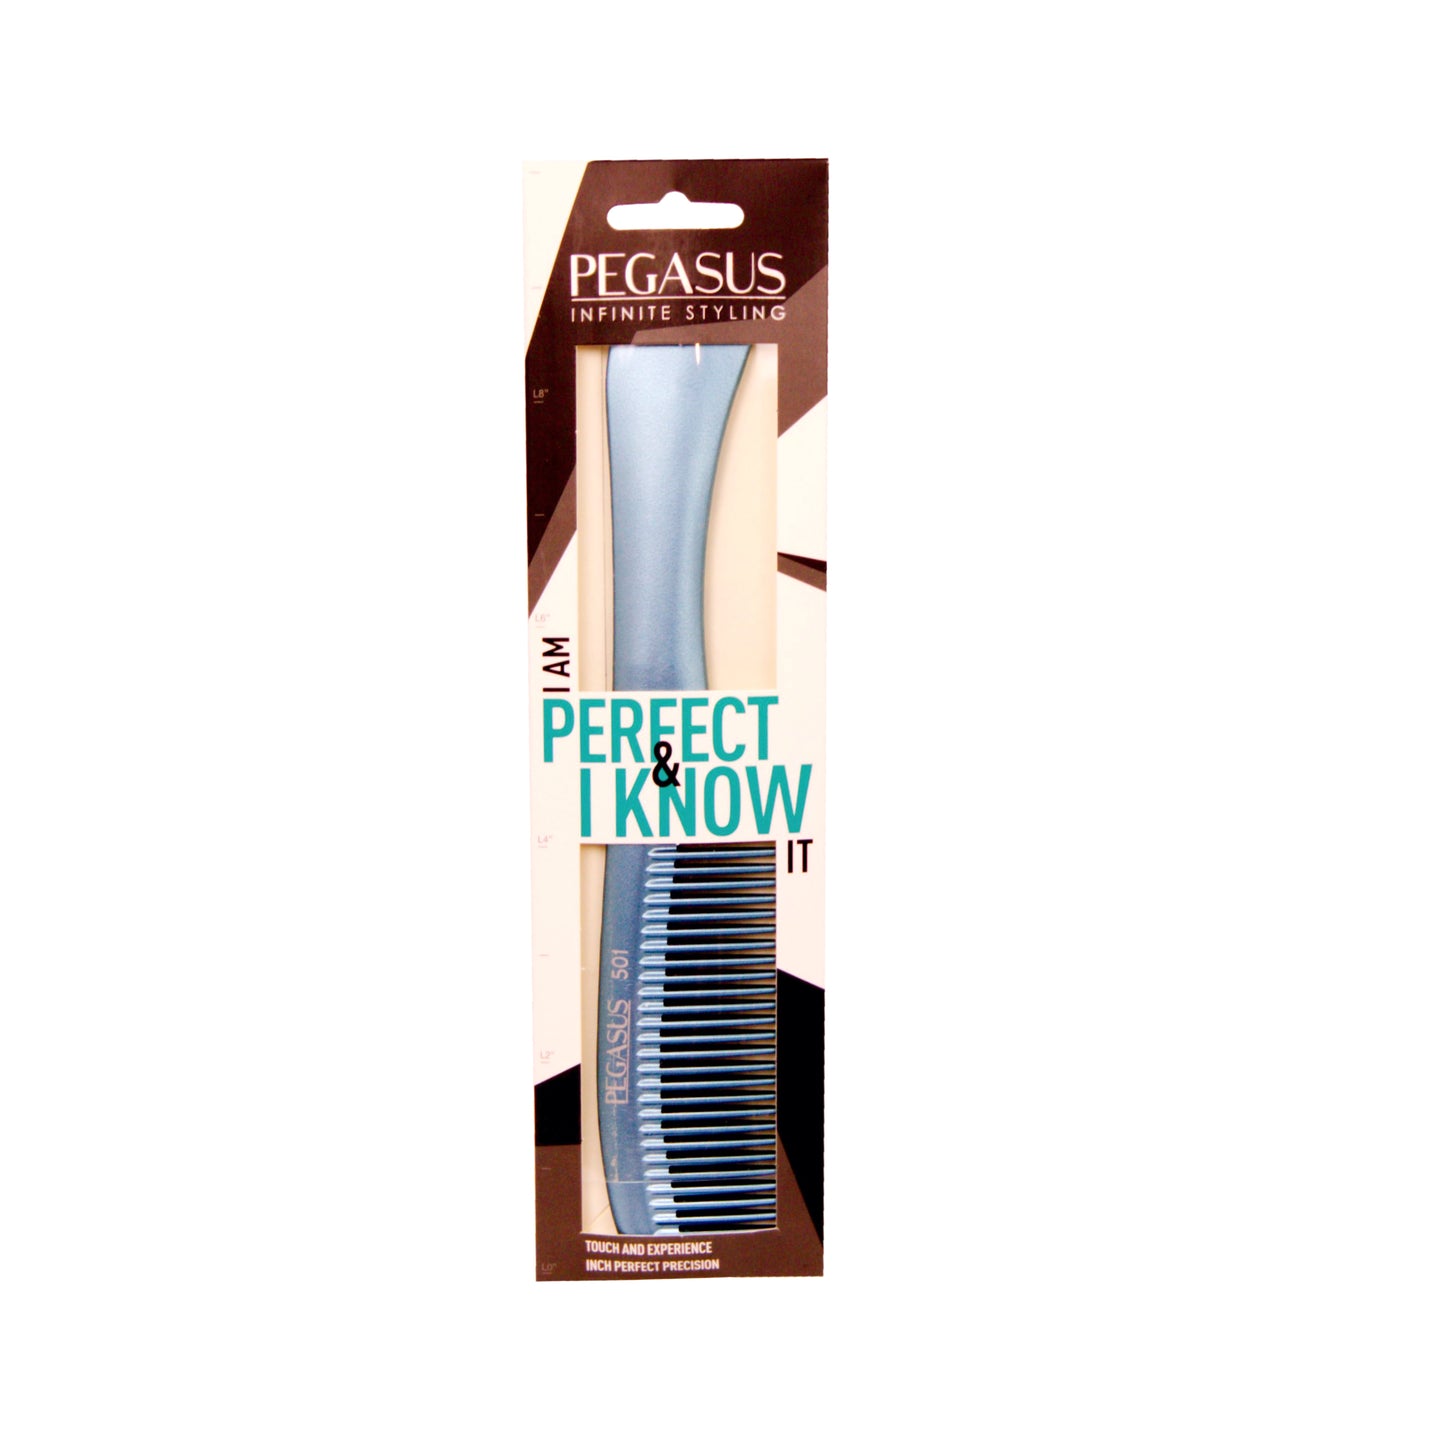 Pegasus MICOLOR 501, 9in Hard Rubber Handle Comb, Handmade, Seamless, Smooth Edges, Anti Static, Heat and Chemically Resistant, Wet Hair, Everyday Grooming Comb | Peines de goma dura - Blue